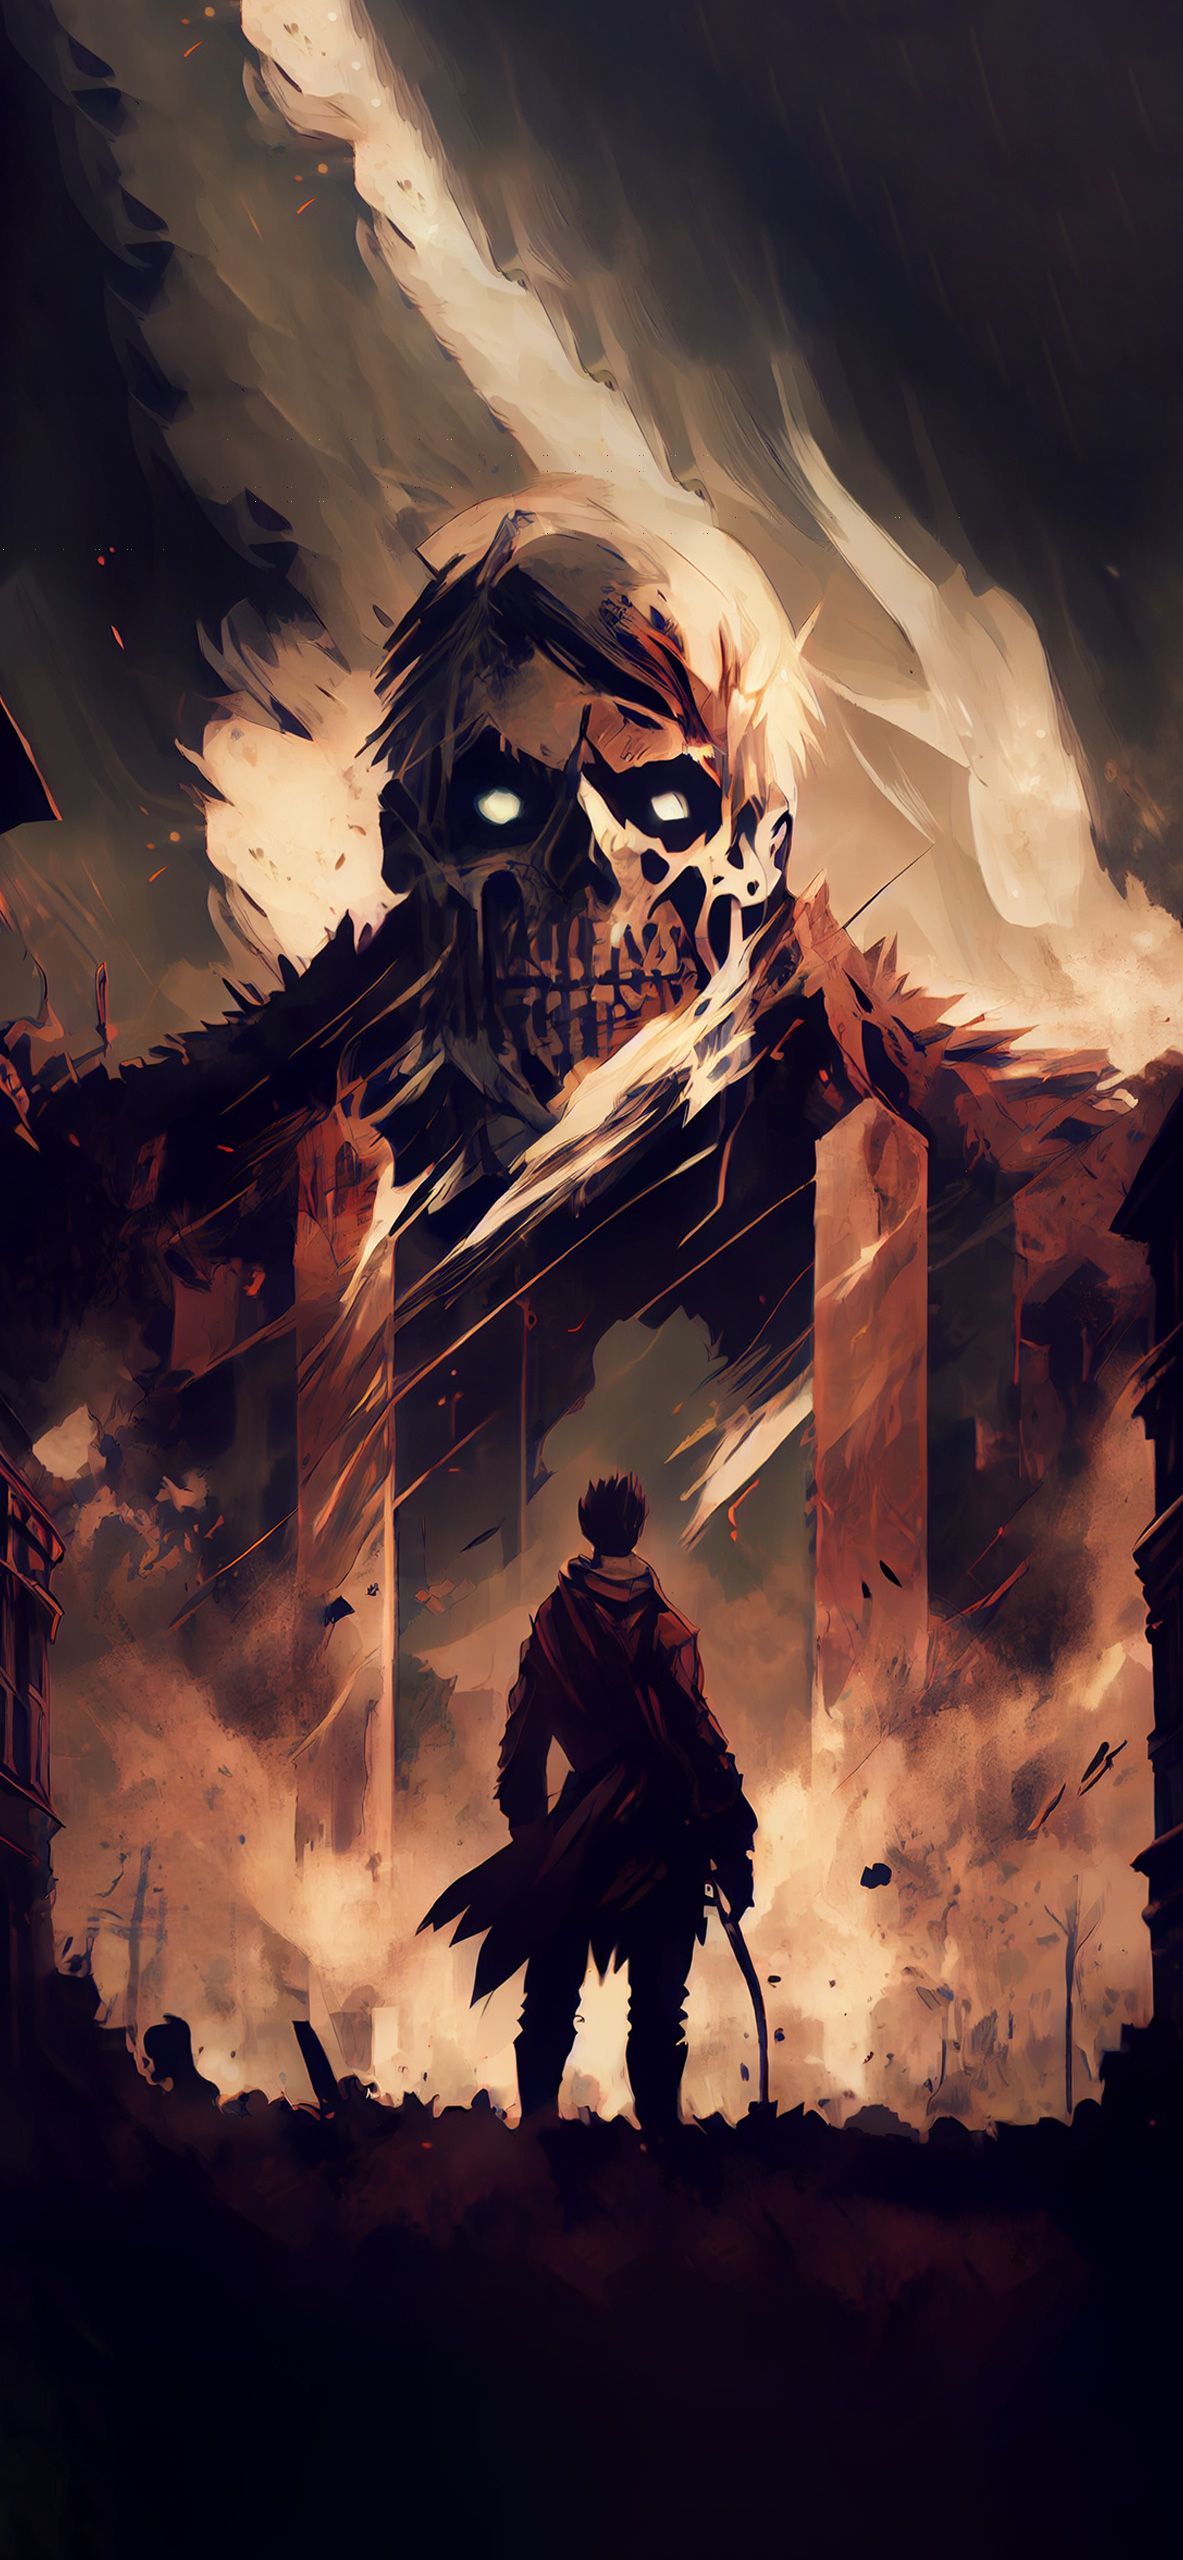 Attack on Titan Style Wallpaper Aesthetic Wallpaper iPhone